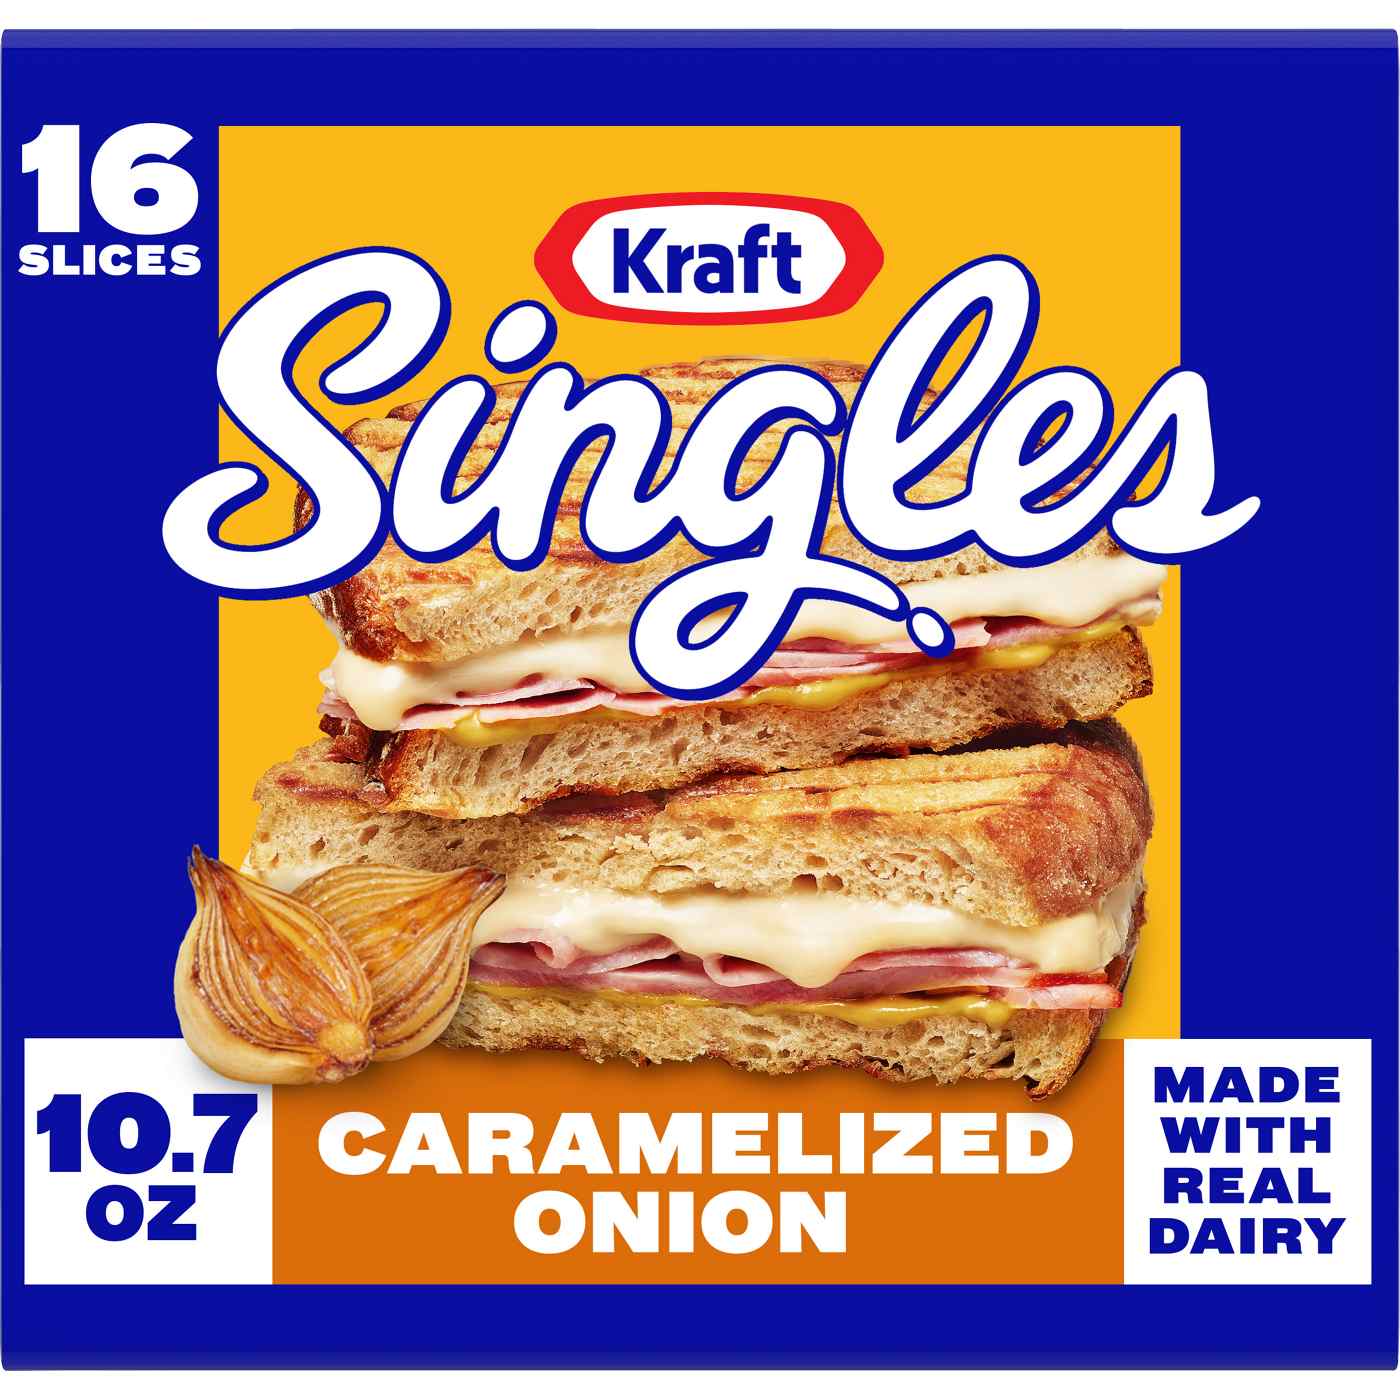 Kraft Singles Caramelized Onion Sliced Cheese; image 1 of 2